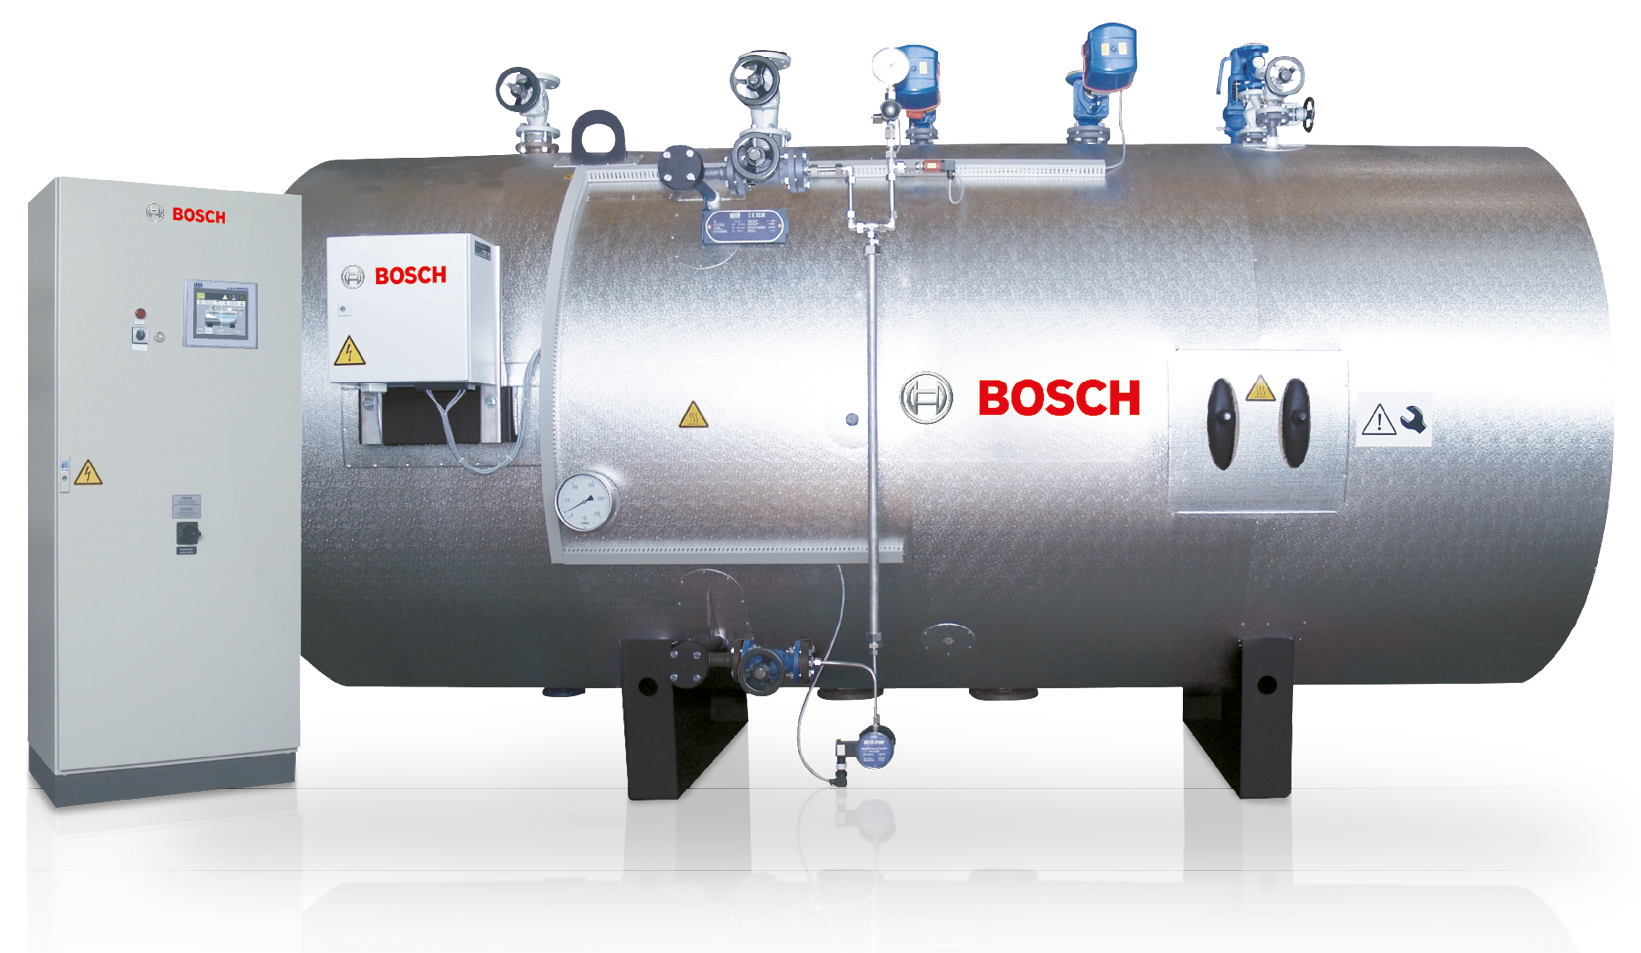 High-pressure condensate tank, including equipment and control